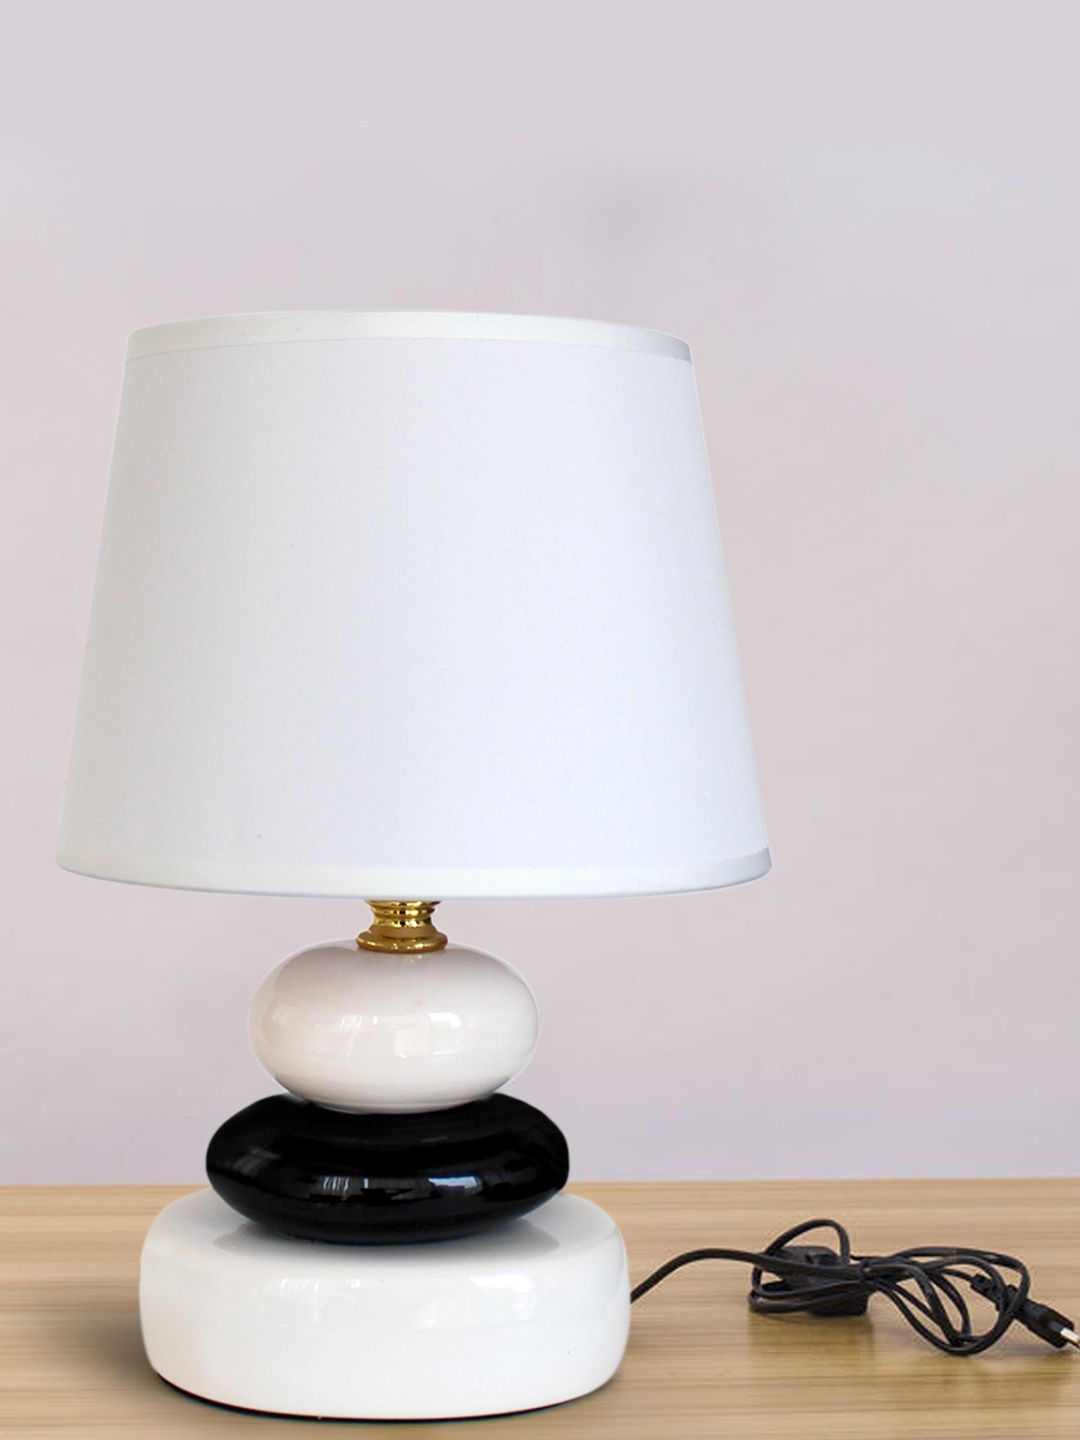 TIED RIBBONS White & Black Decorative Bedside Table Top Table Lamp with Shade Price in India